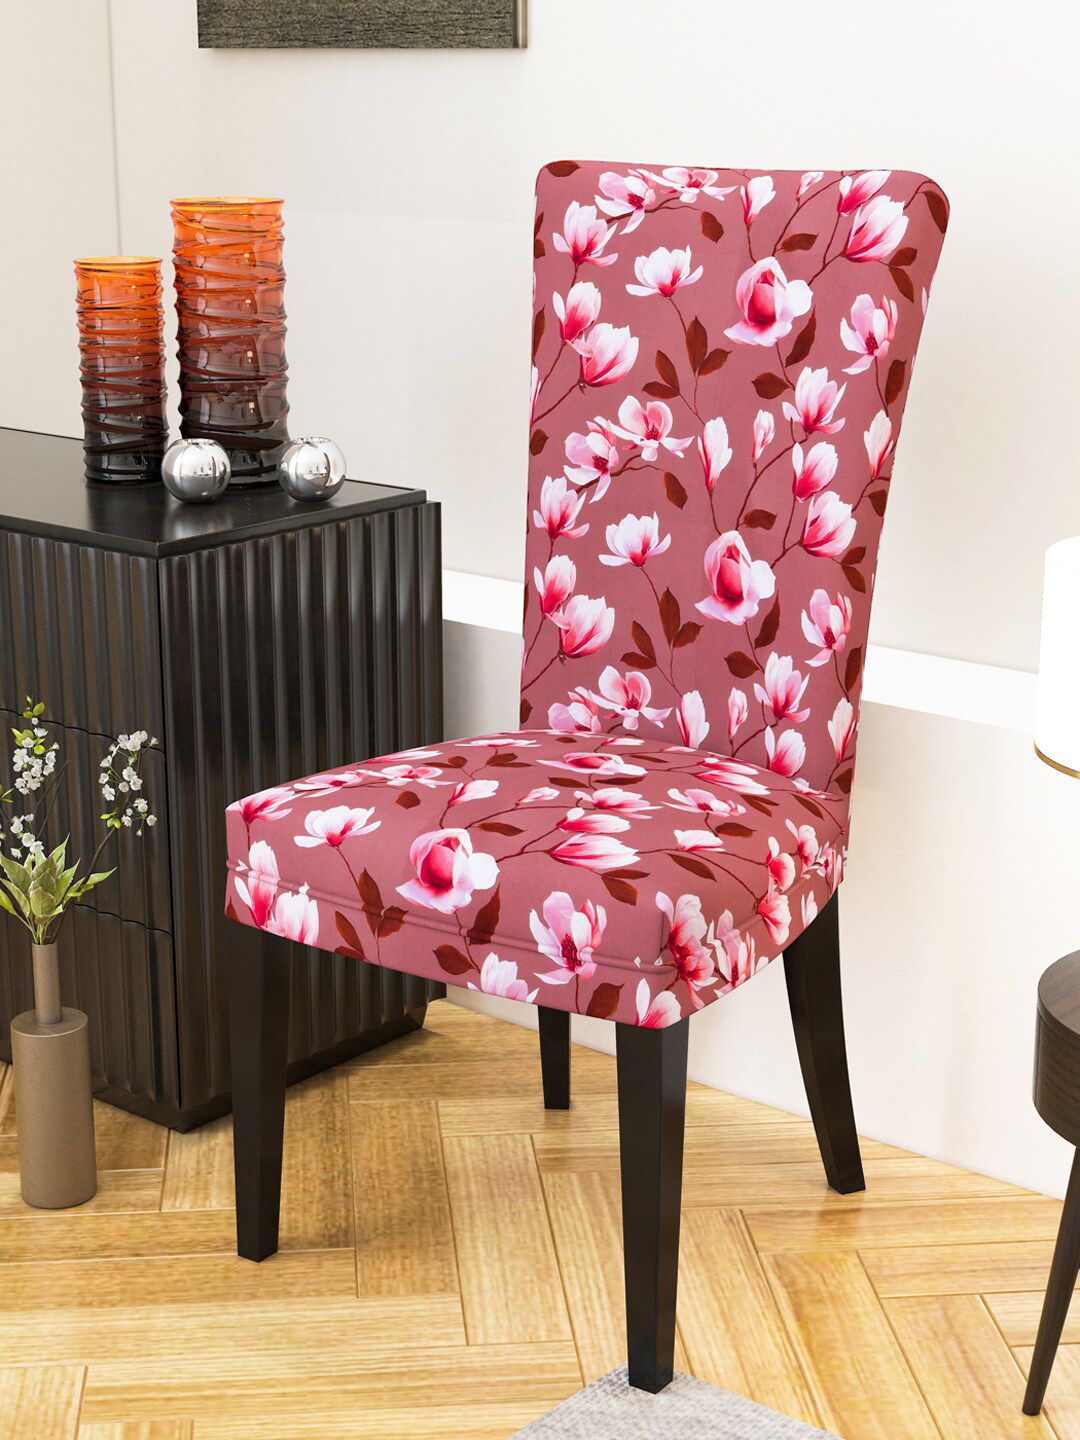 Nendle Set Of 6 Floral Printed Chair Covers Price in India